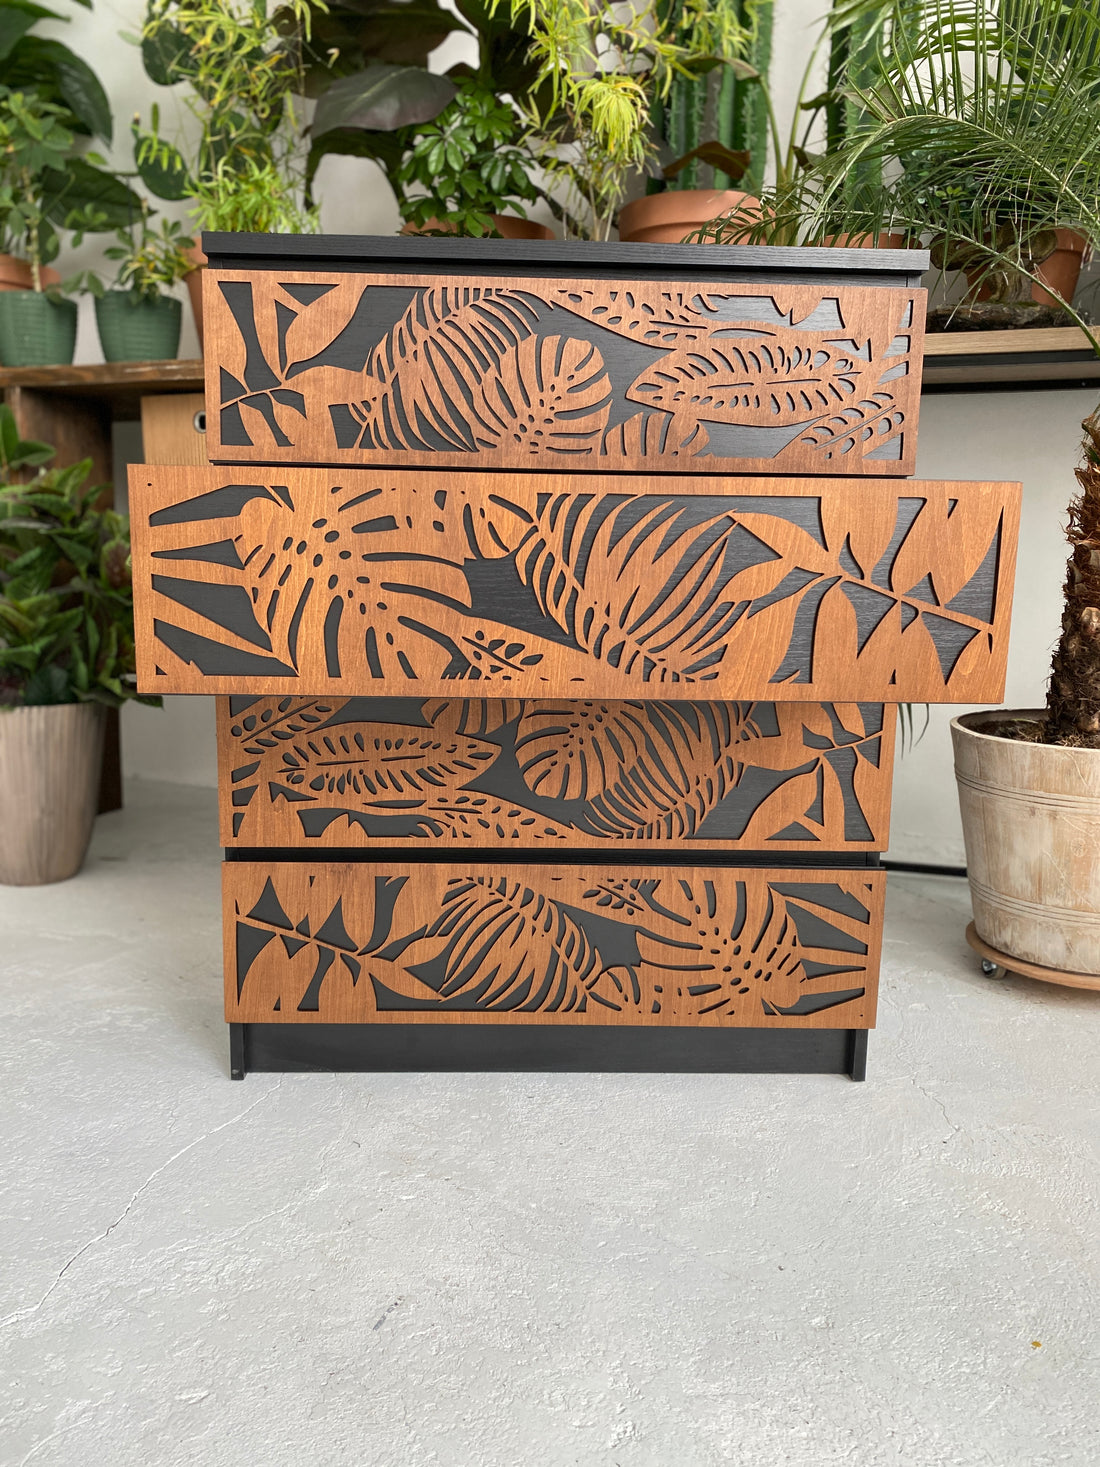 Overlay wooden panels for decorating ikea malm dresser with tropical pattern - Artvoom